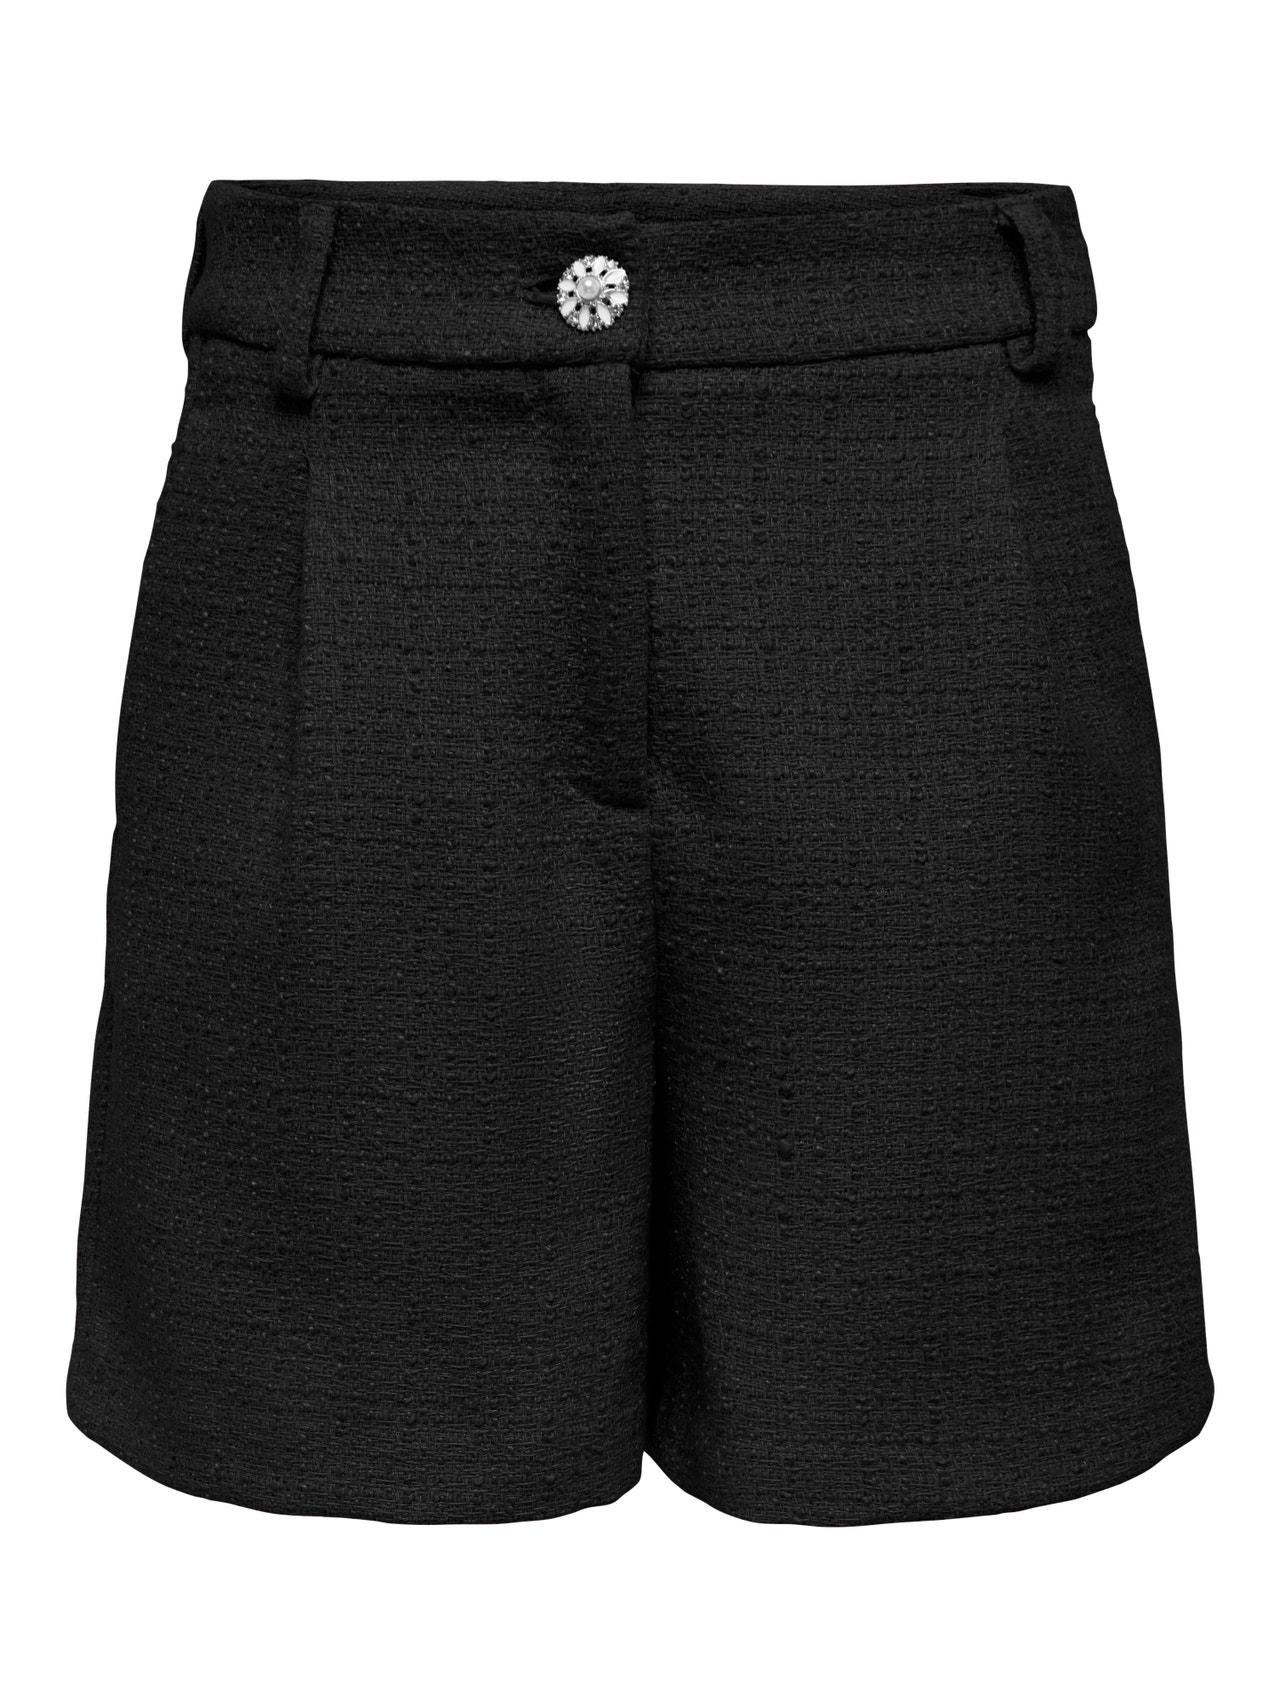 ONLY Mini casual shorts -Black - 15293952